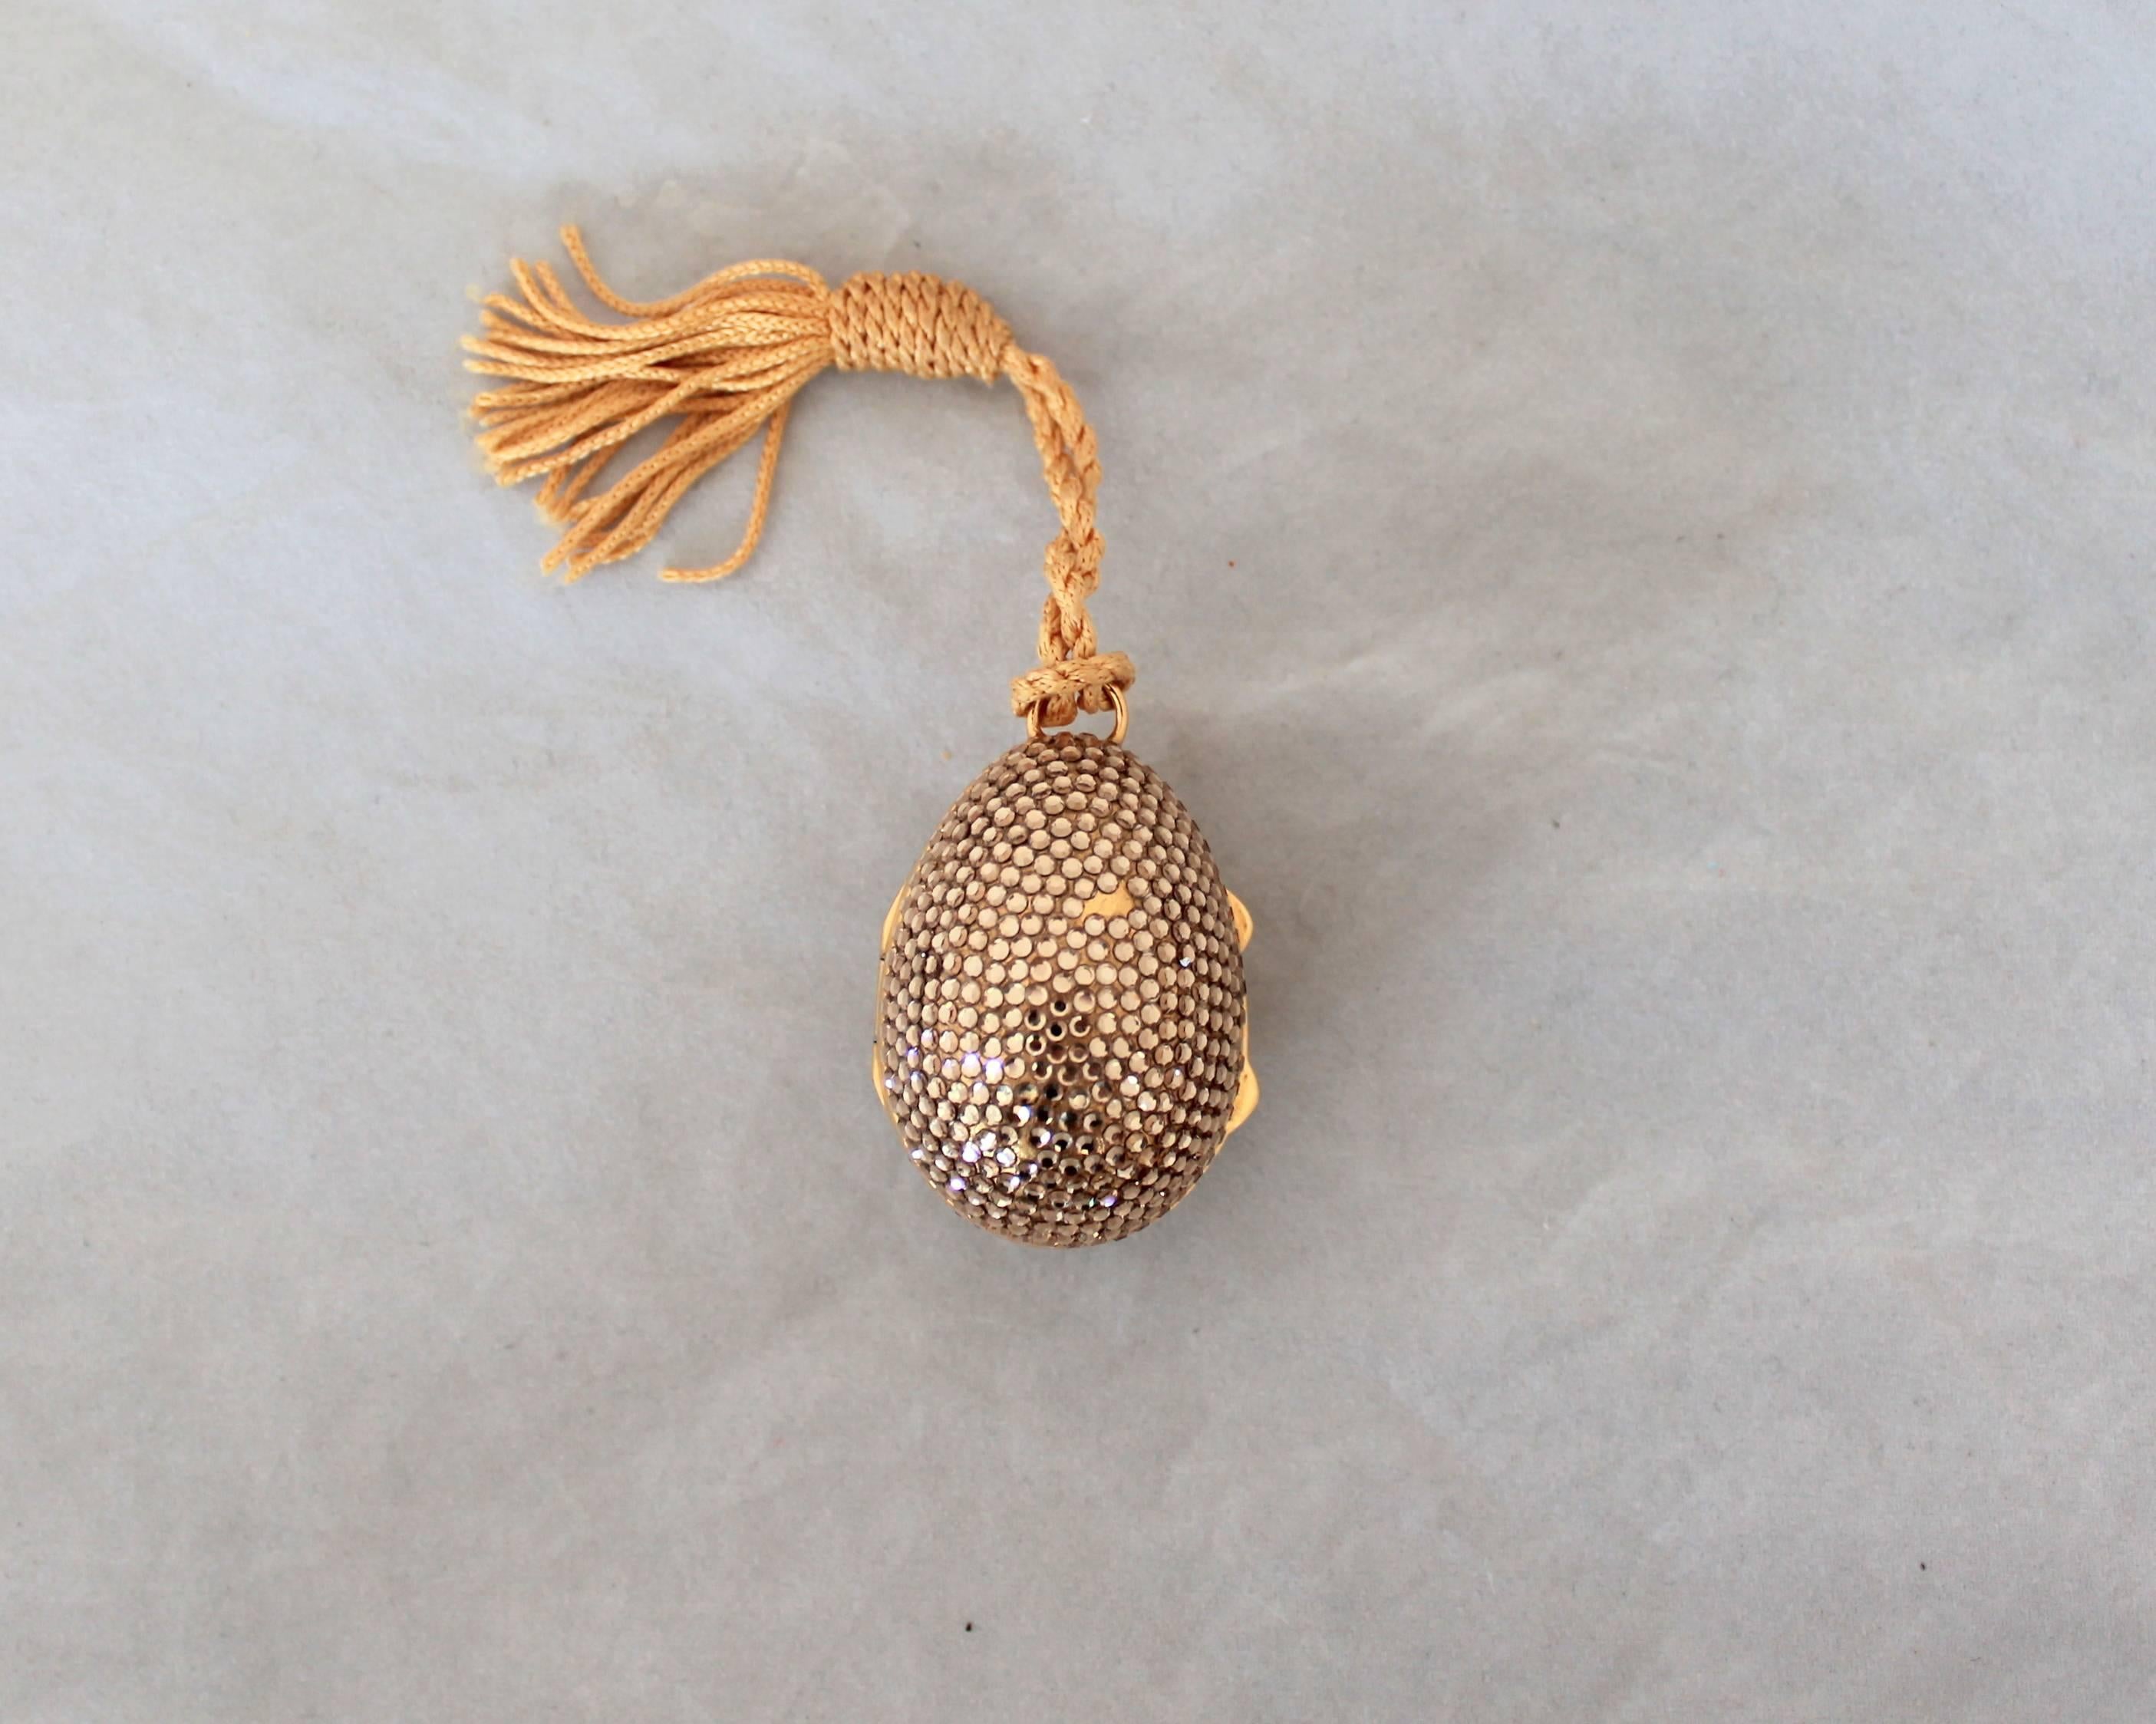 Judith Leiber Gold & Clear Rhinestone Egg Pillbox with Tassel. This piece is in fair condition with stones missing on the front and back as seen in the images. The front of the egg has a bow image.

Measurements:
Heigth- 1.75